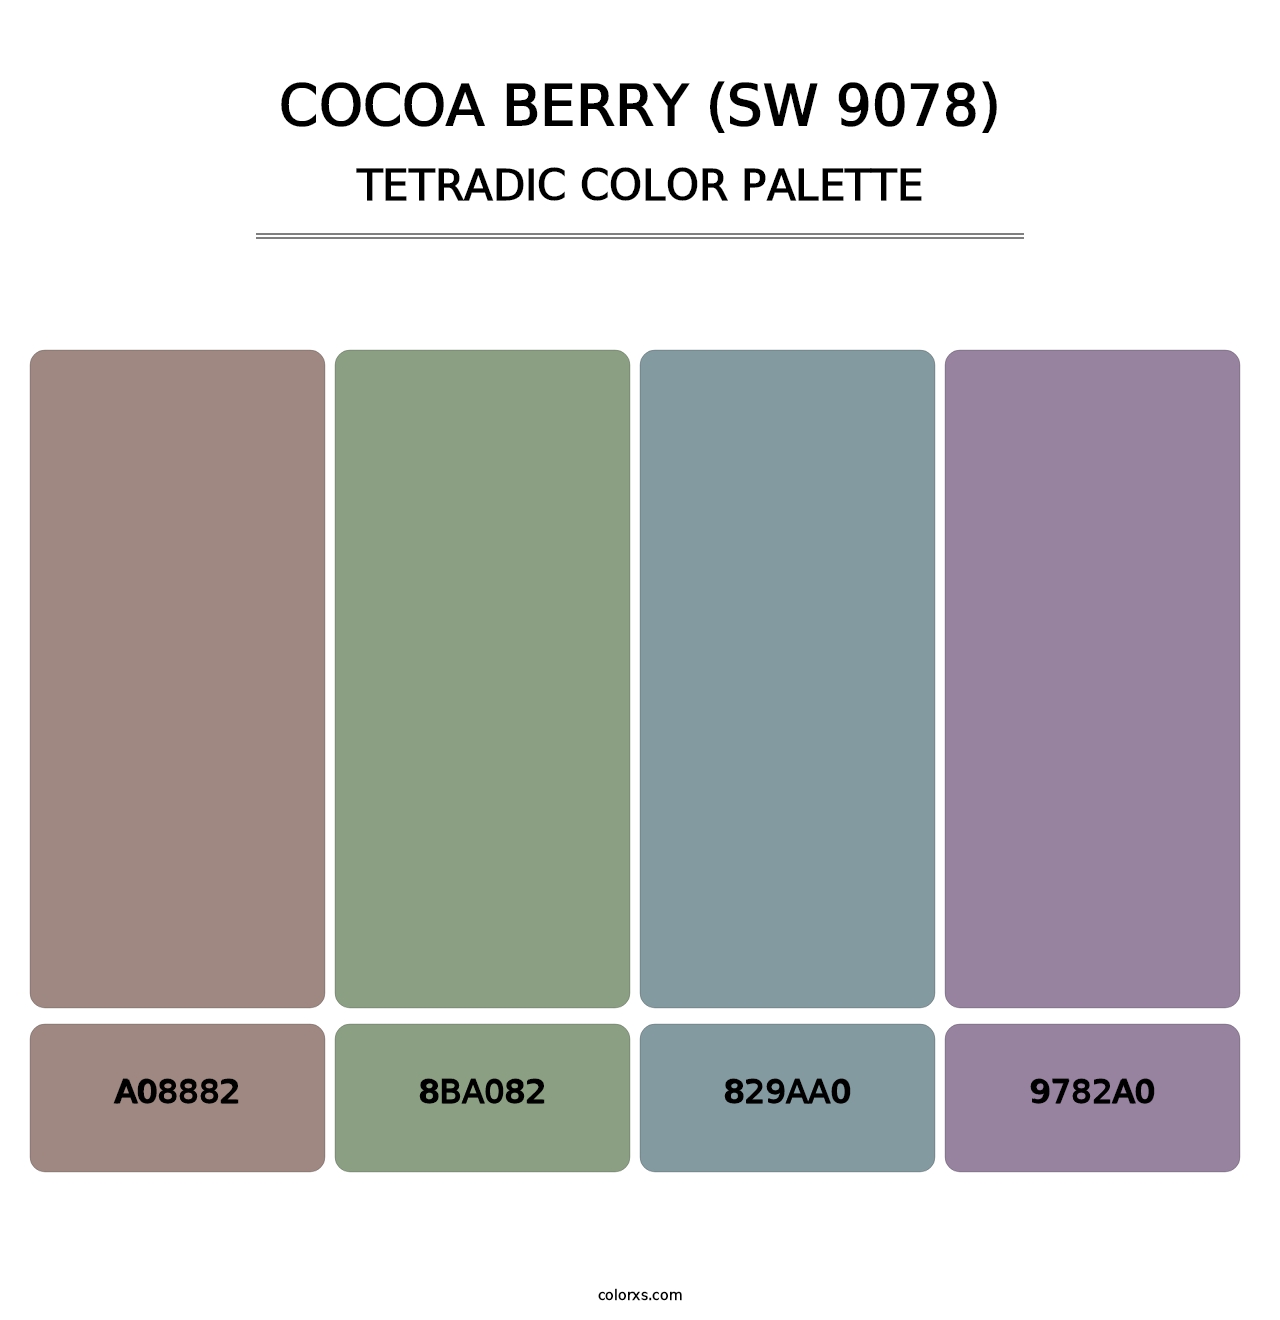 Cocoa Berry (SW 9078) - Tetradic Color Palette